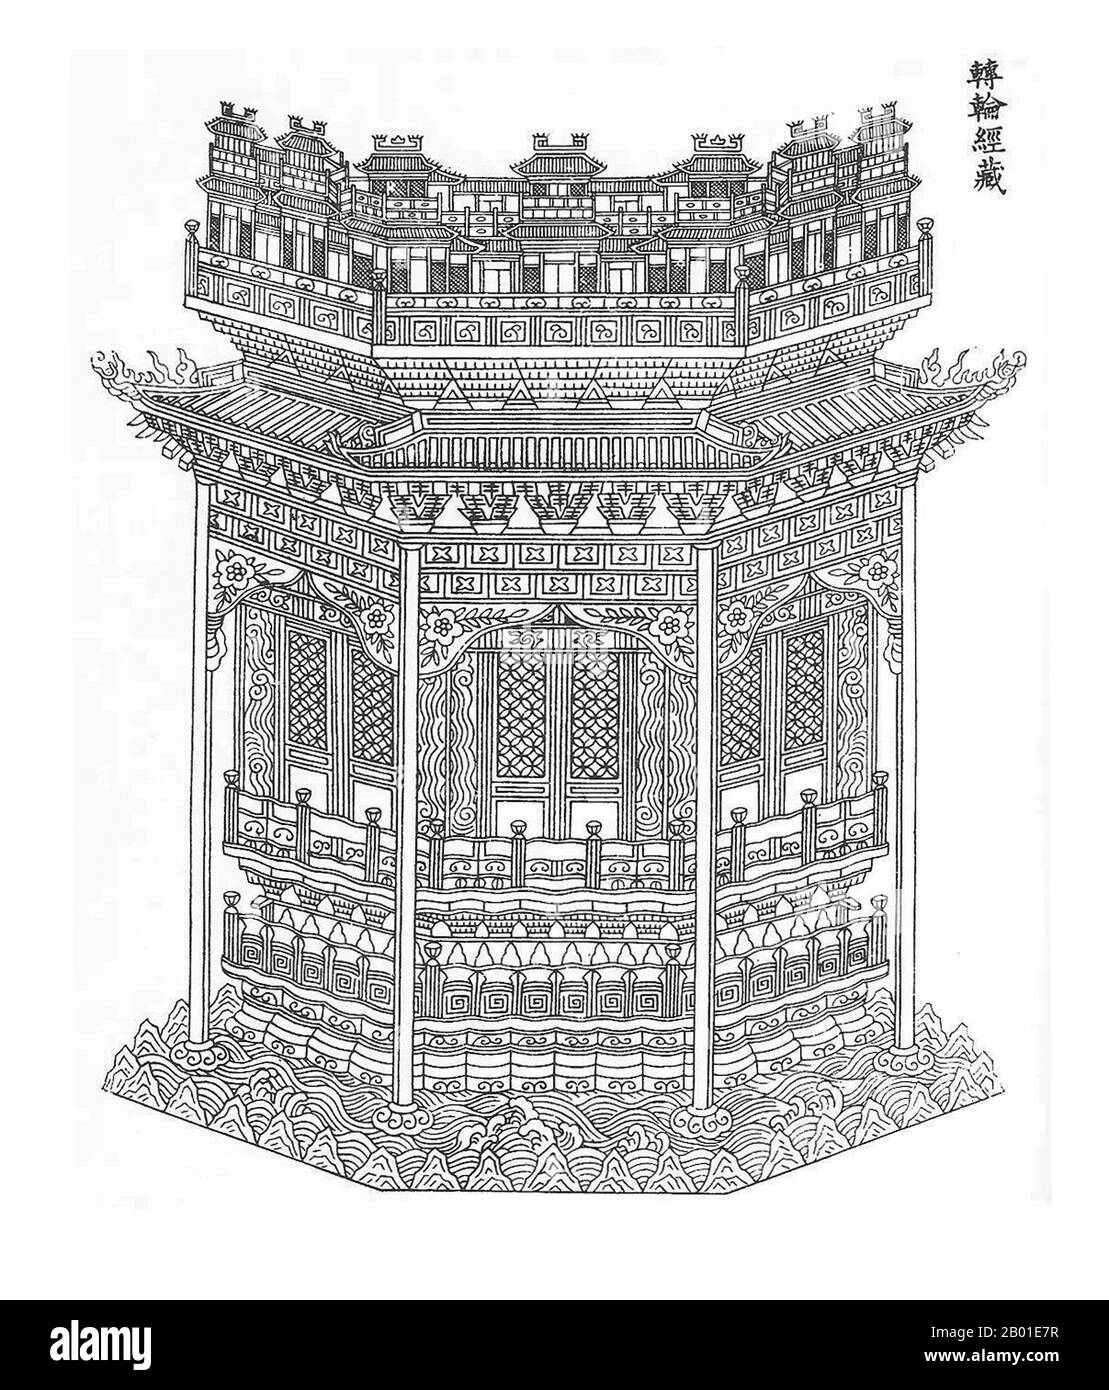 China: The 'Buddhist Ark' used to contain scriptures at the Kaifeng Synagogue. Drawing by Lie Jie (1065-1110) from his architectural treatise 'Yingzao Fashi', 1103 CE.  The Kaifeng Jews are members of a small Jewish community that has existed in Kaifeng, in the Henan province of China, for hundreds of years.  Jews in modern China have traditionally called themselves Youtai (from Judah) in Mandarin Chinese which is also the predominant contemporary Chinese language term for Jews in general. However, the community was known by their Han Chinese neighbors as adherents of Tiaojinjiao. Stock Photo